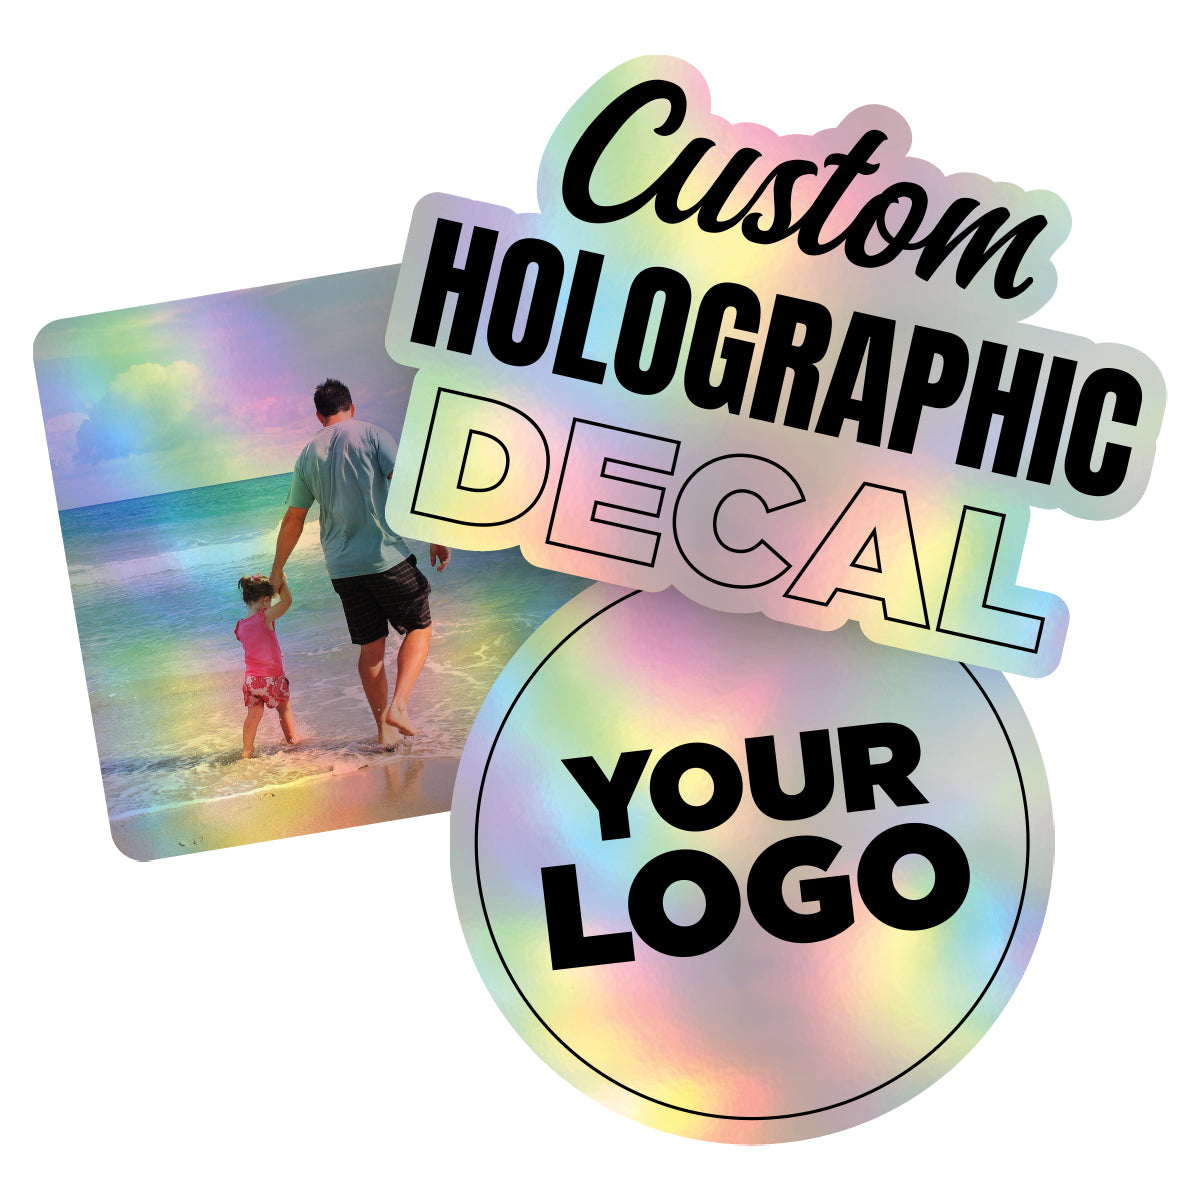 Personalized Holographic Vinyl Sticker Decal Custom Made Any Logo, Image, Text, Or Name Die Cut To Shape - 25 Pack, 10 Inch, Circle